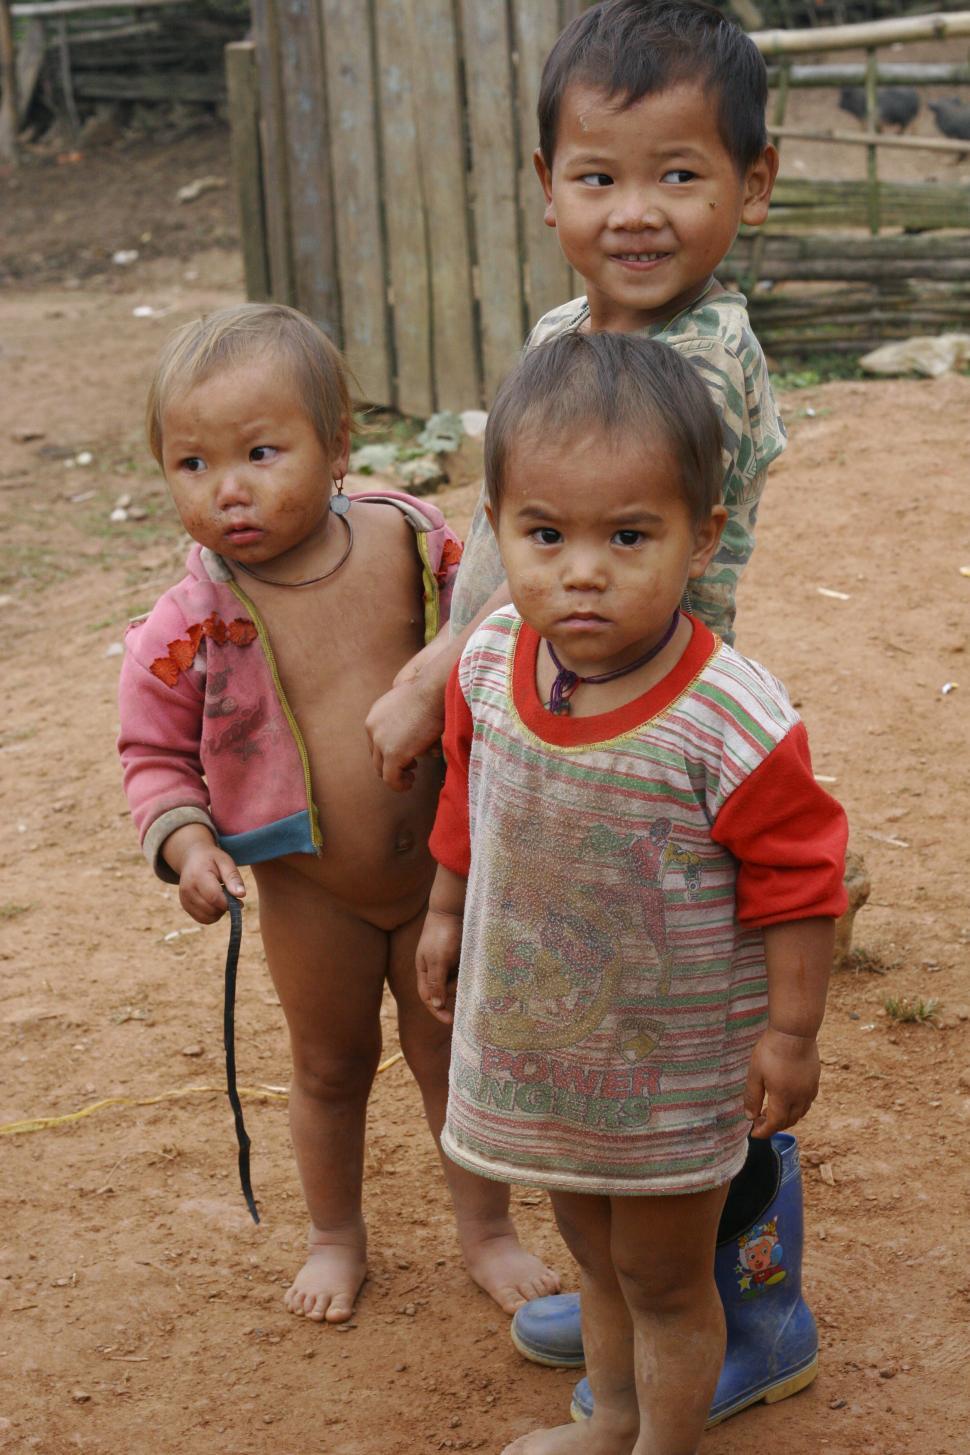 Free Image of Young Children 